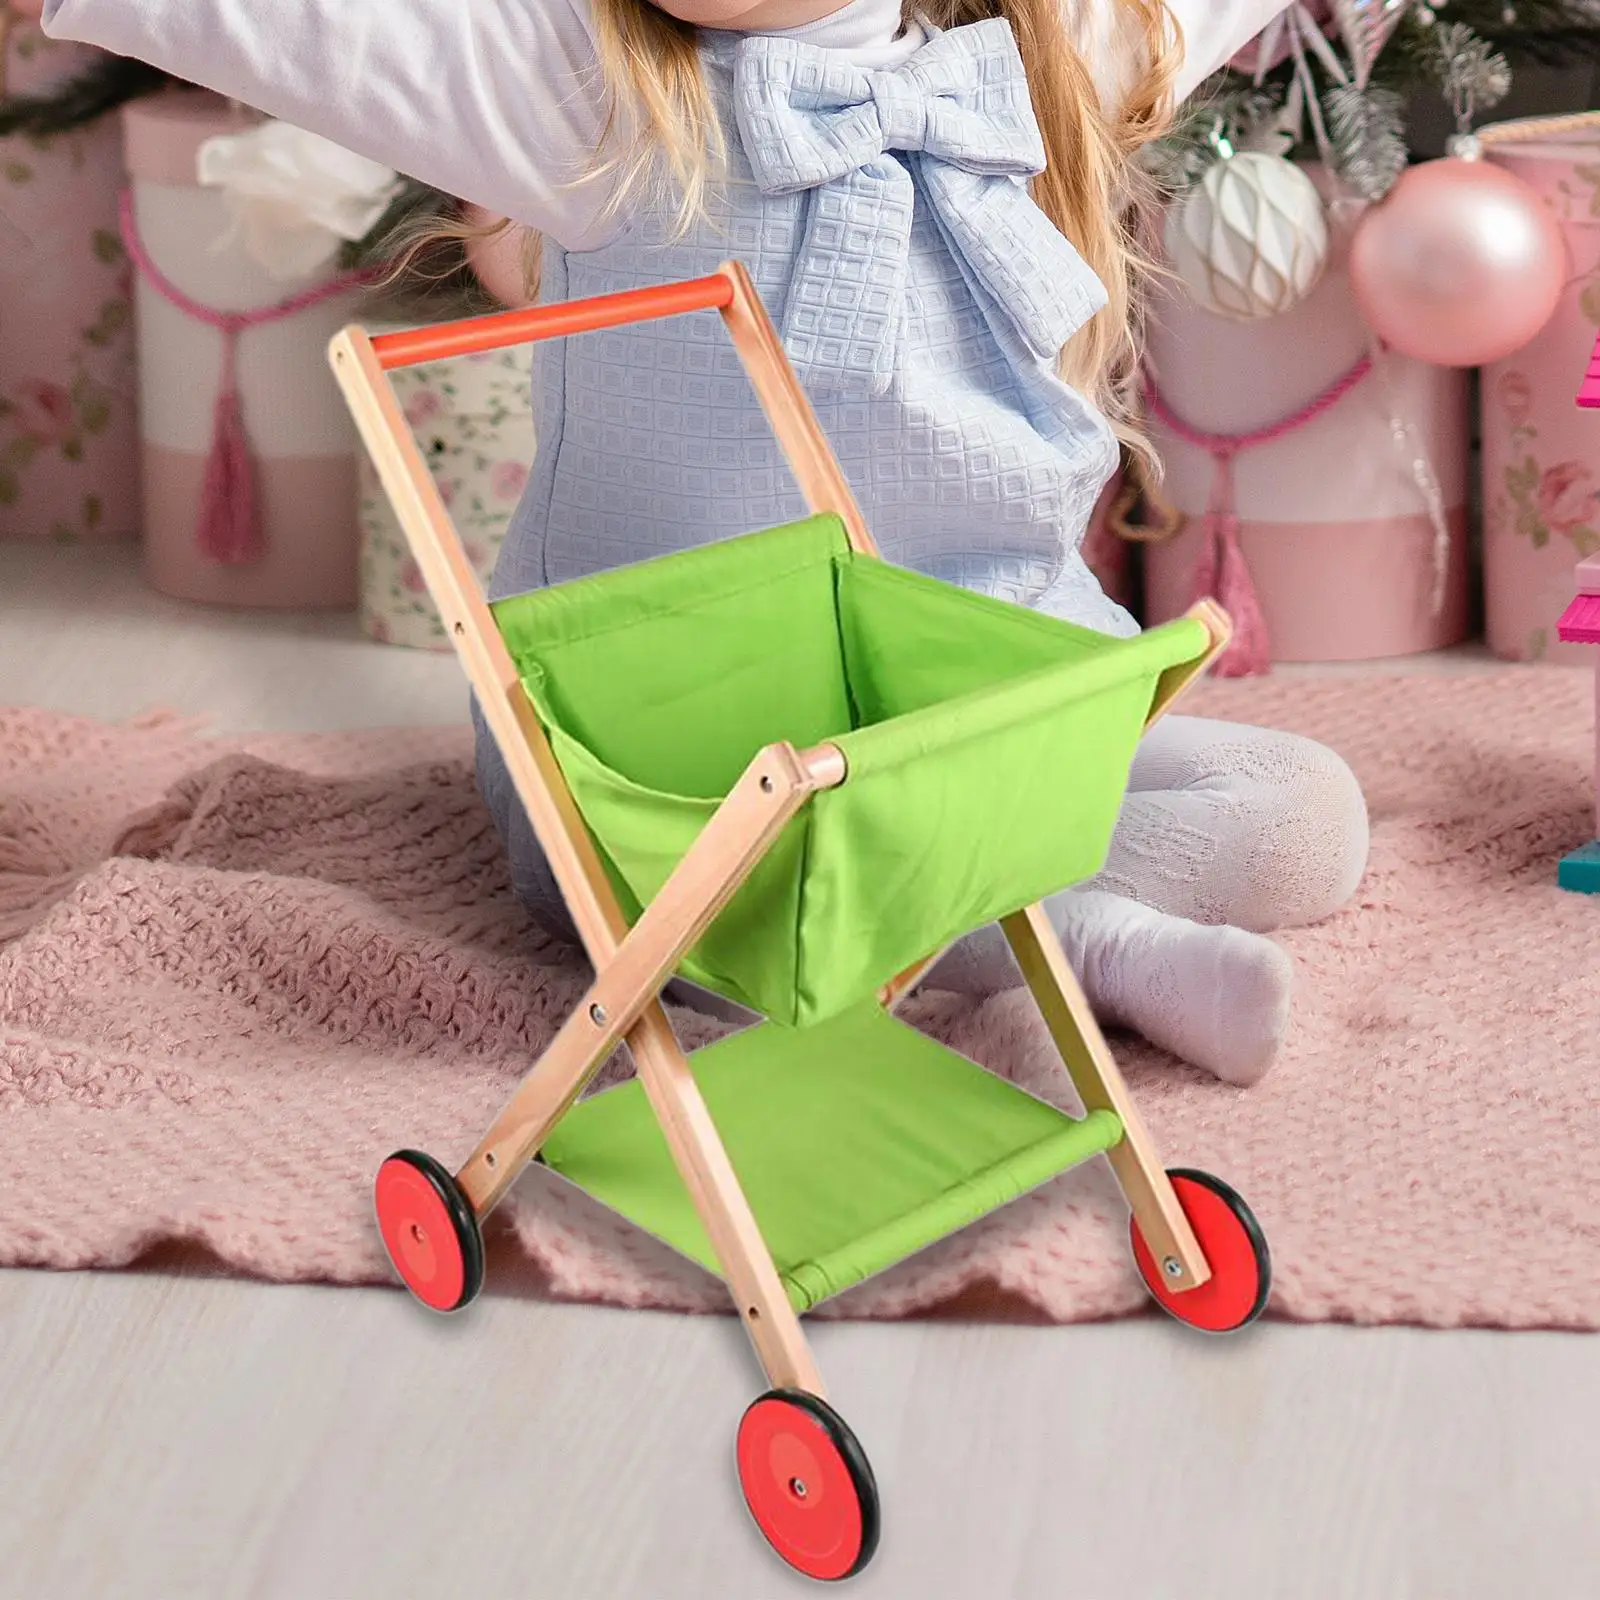 Simulated Grocery Store Shopping Trolley Role Play Toy Pretend Play Supermarket Playset Wood Shopping Cart for Childern Gifts